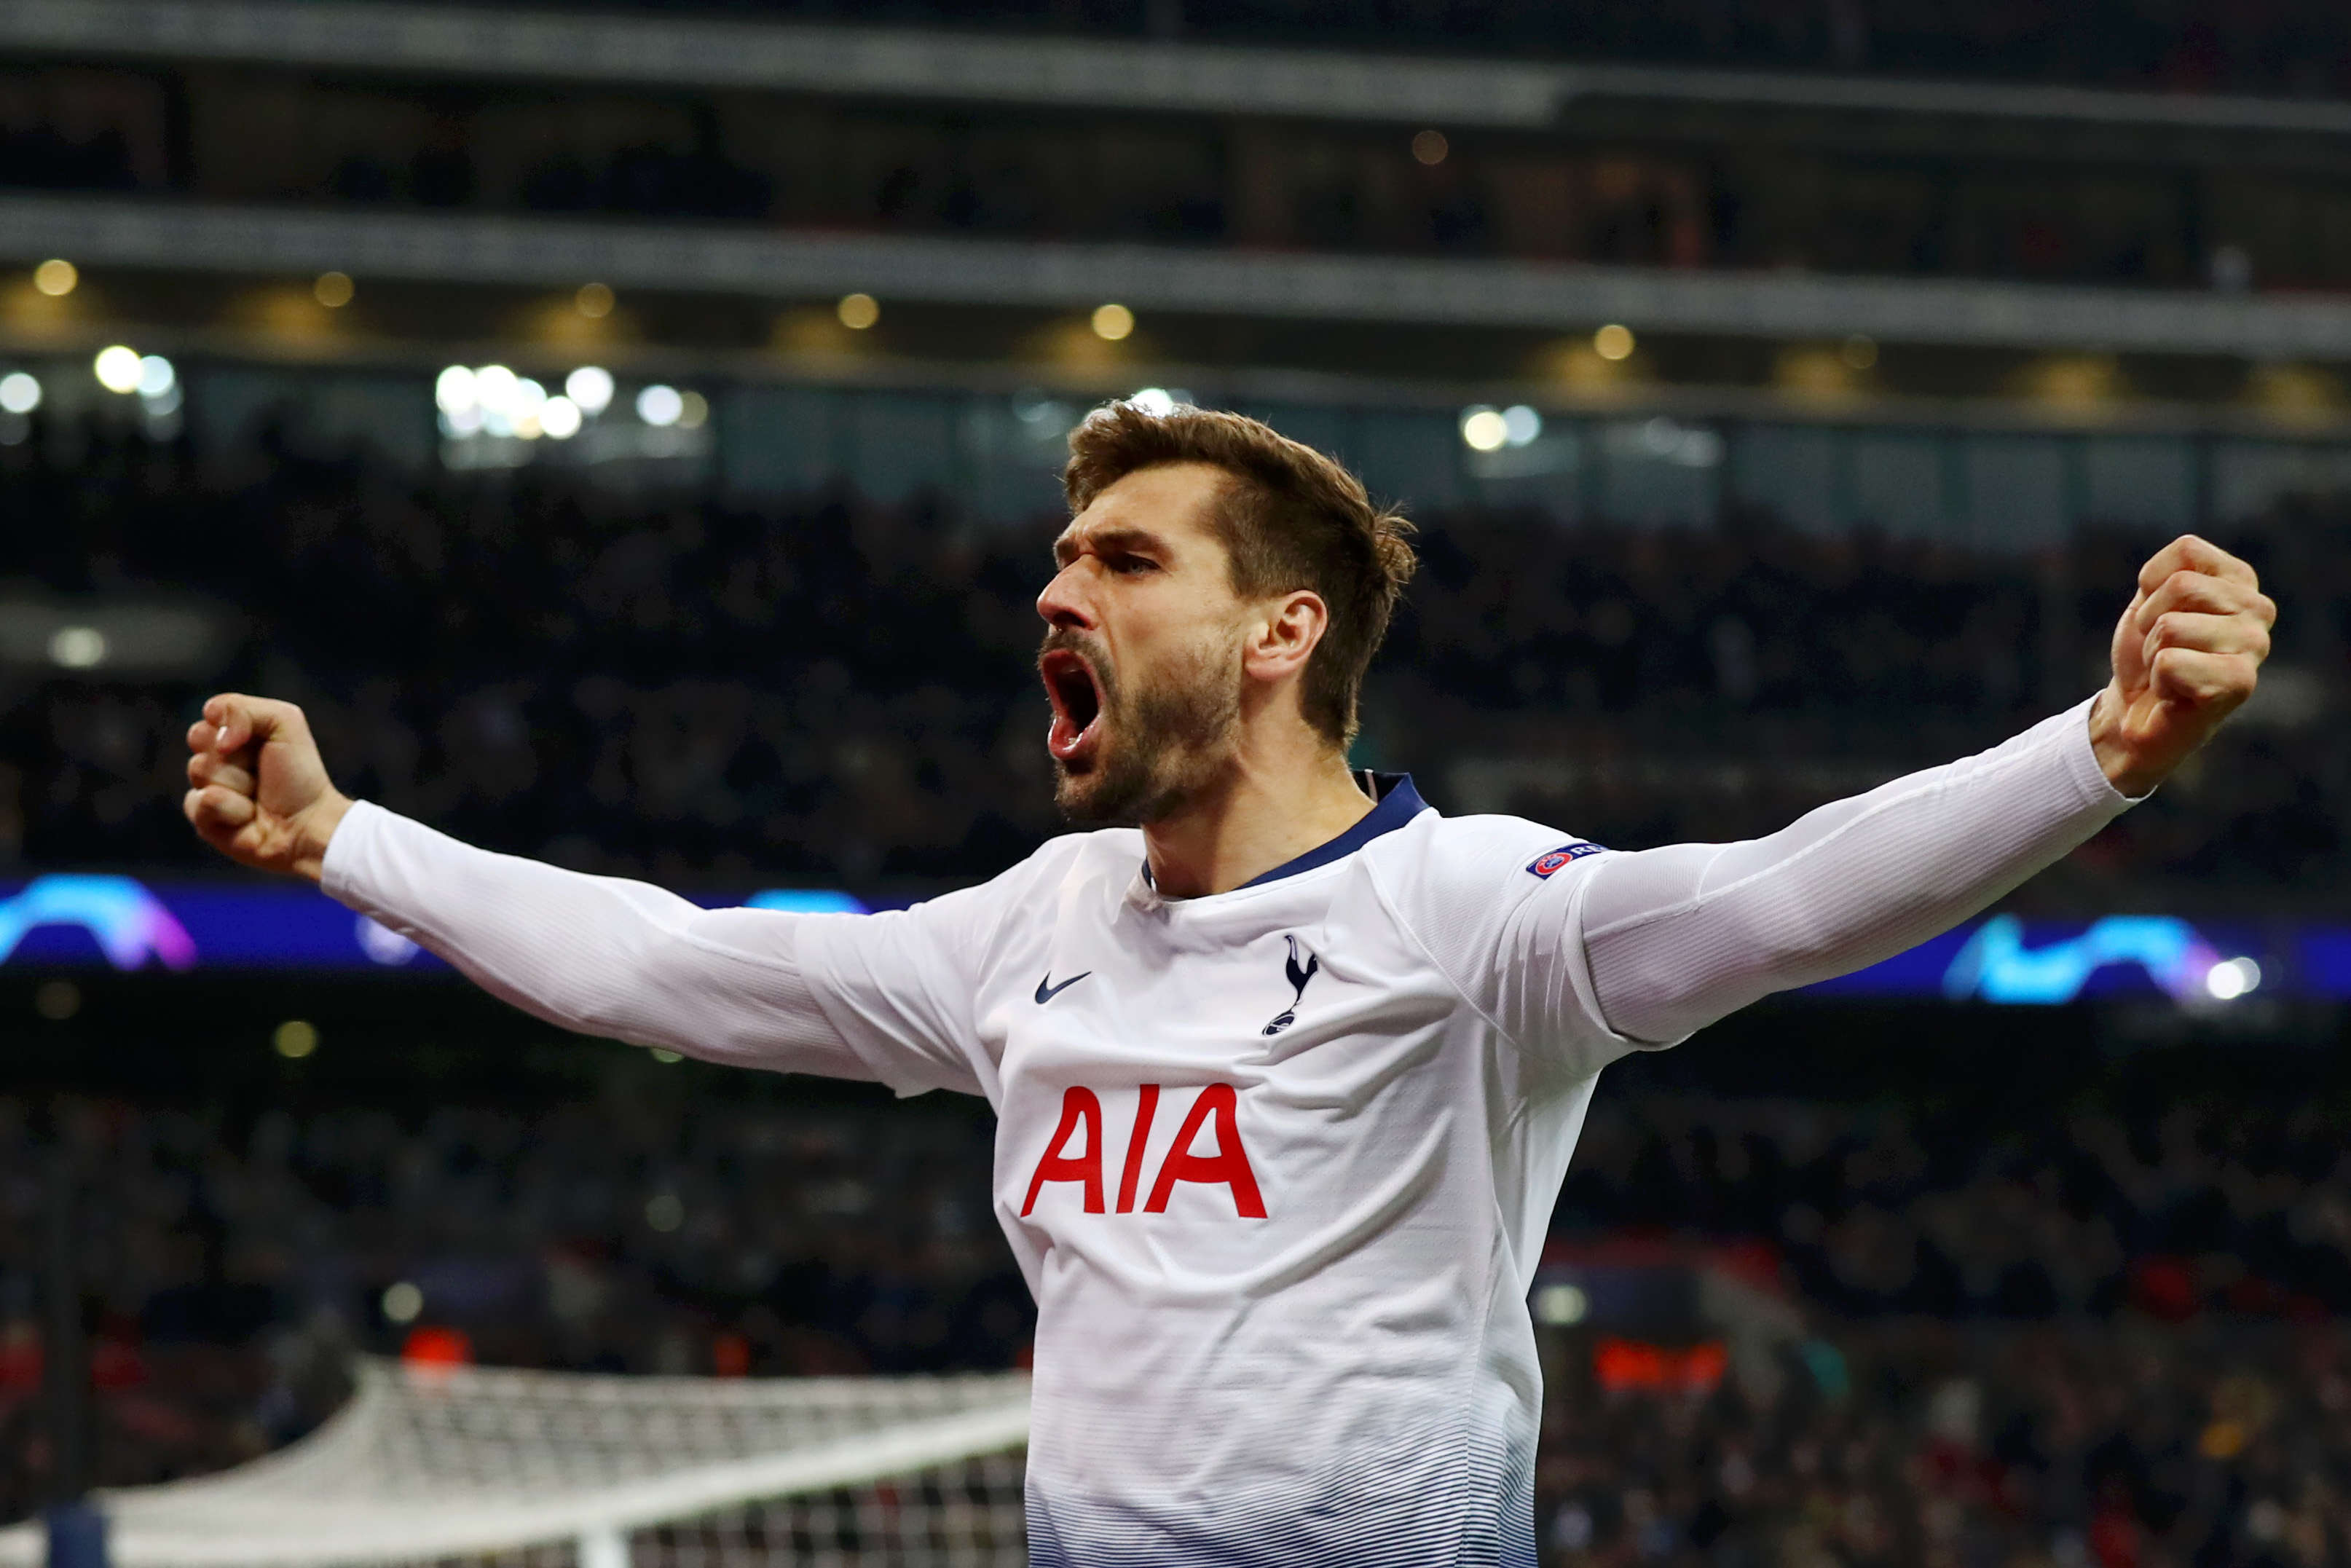 LONDON, ENGLAND - FEBRUARY 13:  Fernando Llorente of Tottenham Hotspur celebrates after scoring his team's third goal during the UEFA Champions League Round of 16 First Leg match between Tottenham Hotspur and Borussia Dortmund at Wembley Stadium on February 13, 2019 in London, England.  (Photo by Clive Rose/Getty Images)